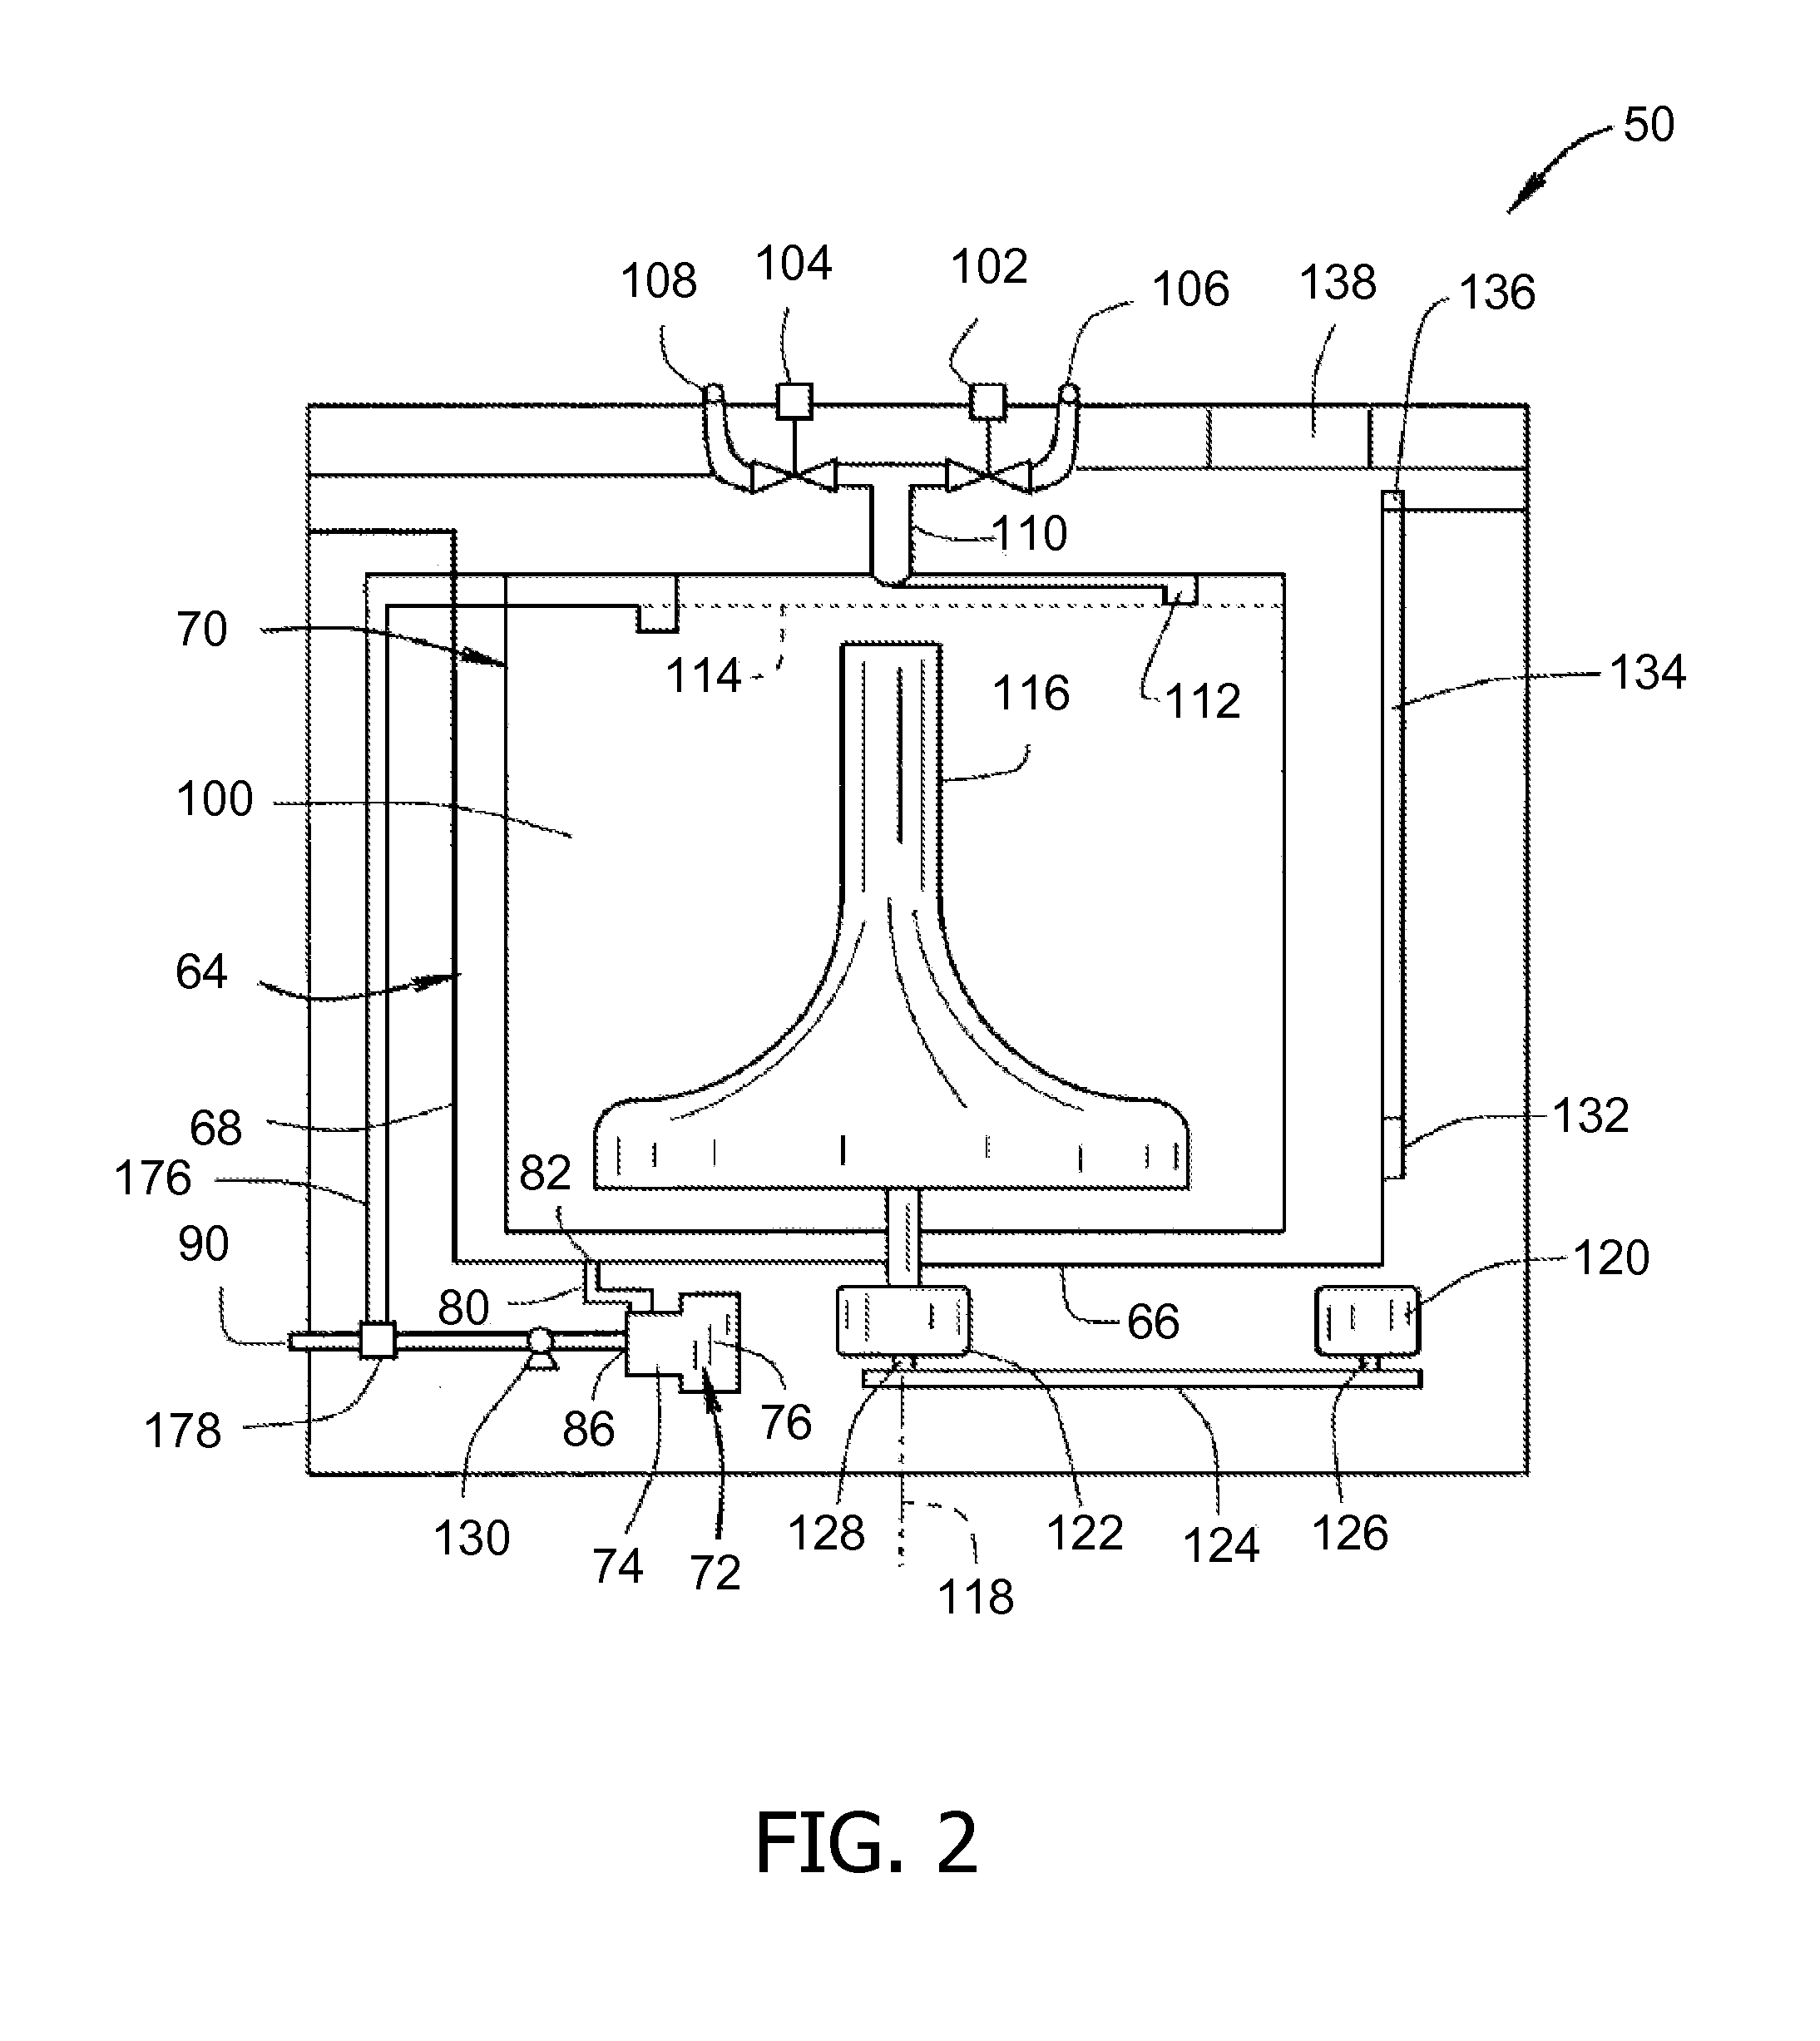 Method and apparatus for balancing an unbalanced load in a washing machine